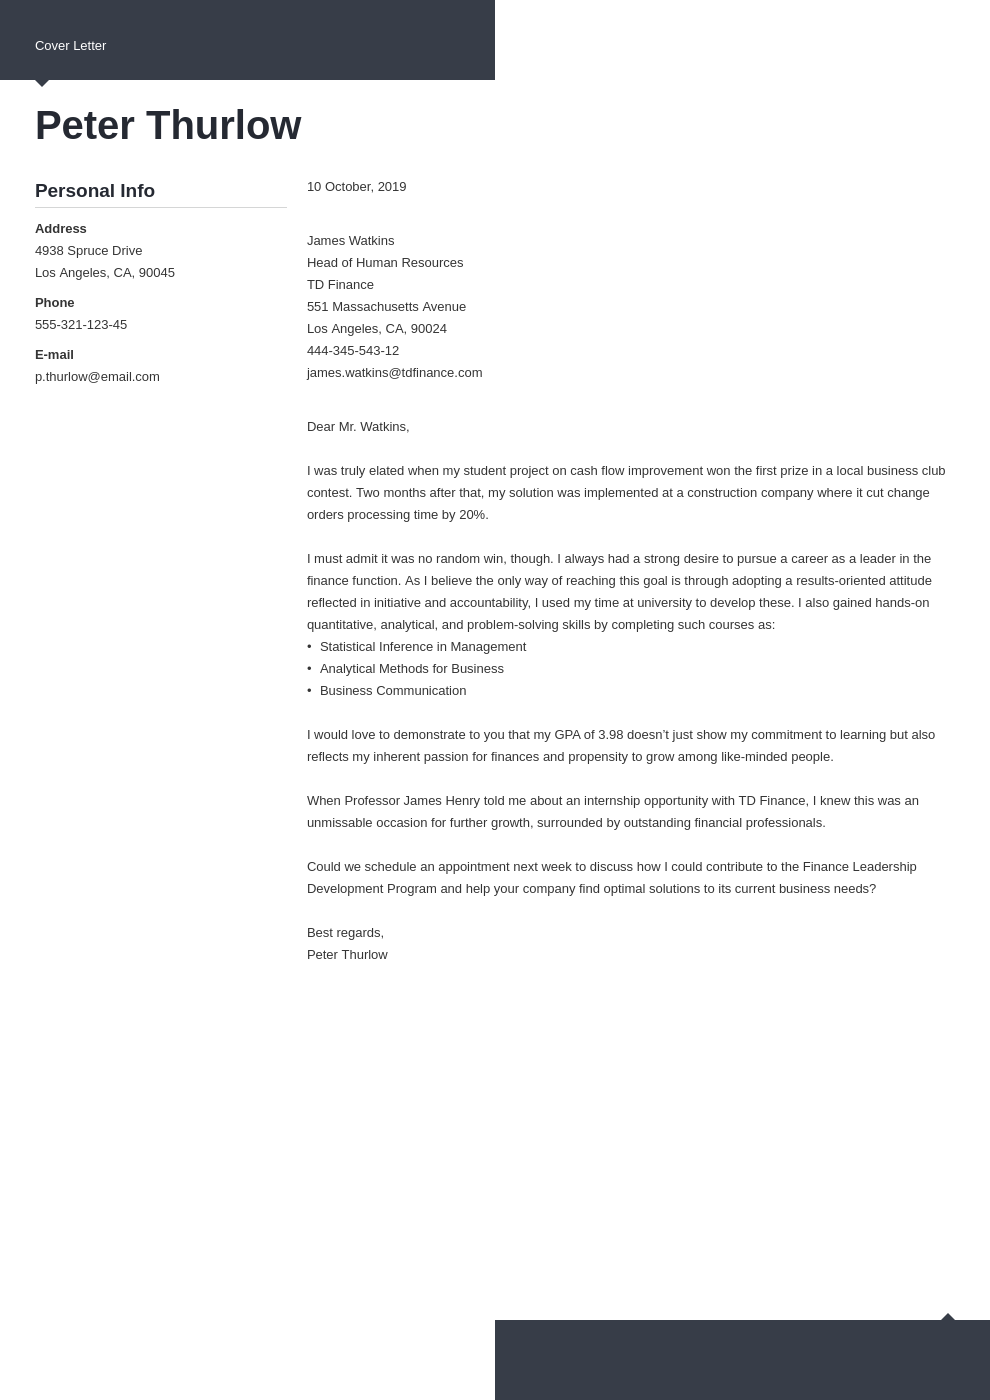 How To Format A Cover Letter For An Internship